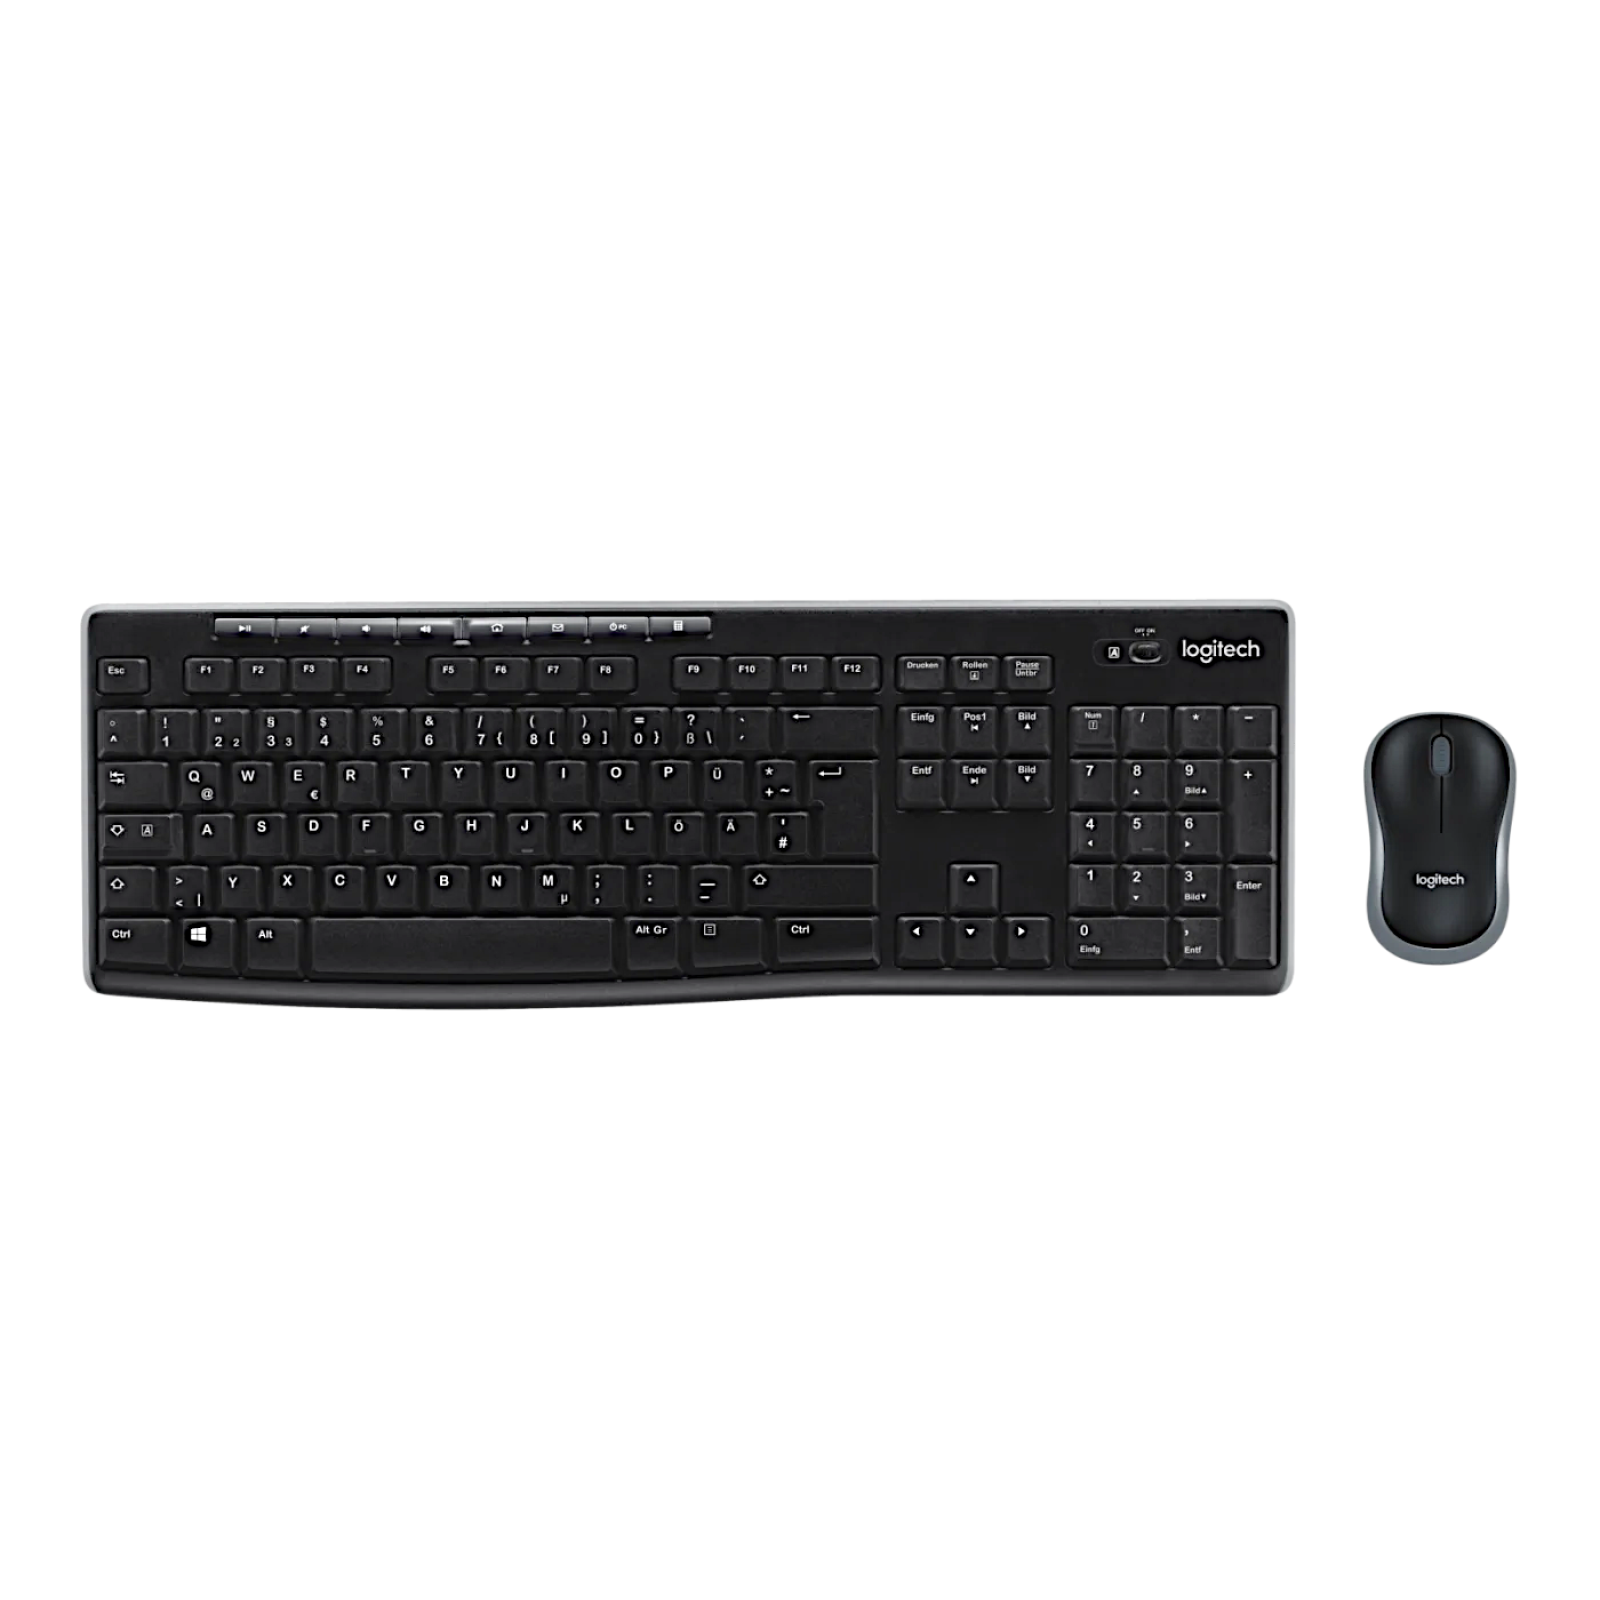 Mouse & Keyboard Set Logitech MK270 - cordless 3-button-mouse germany layout Computers